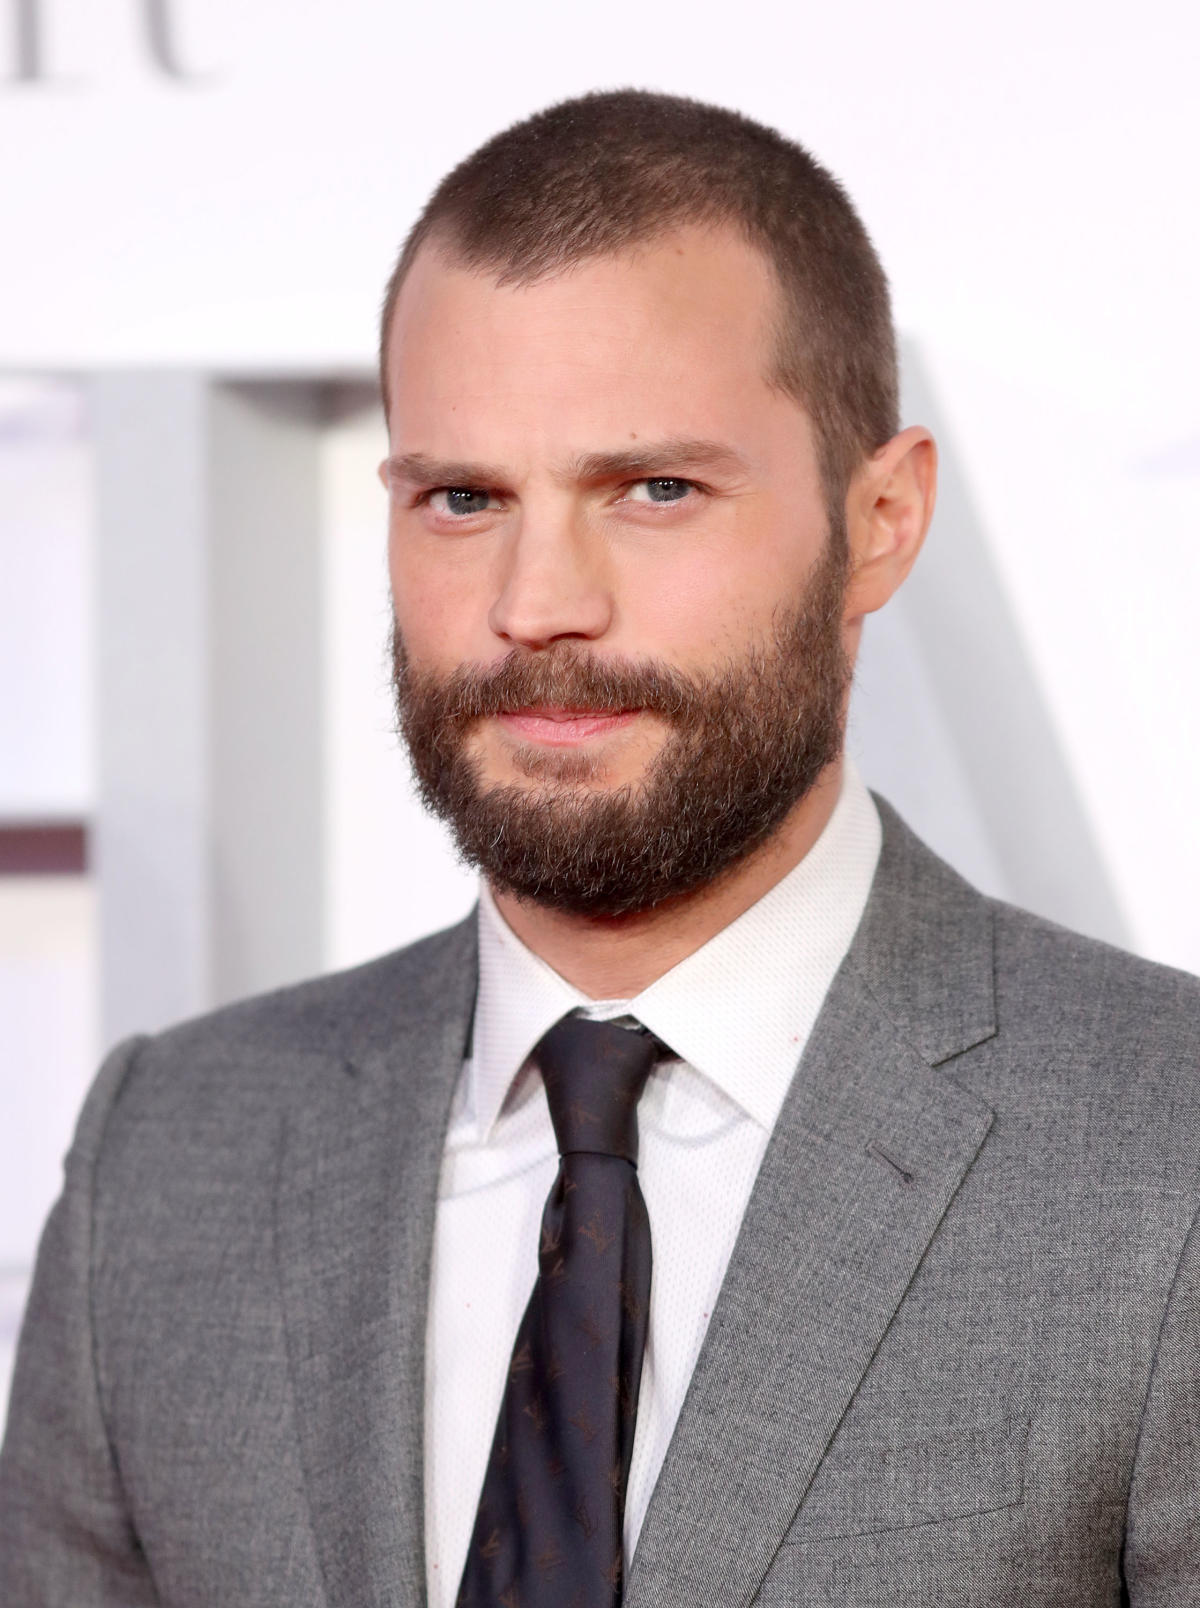 Jamie Dornan's Balls Are, Quite Frankly, Too Much